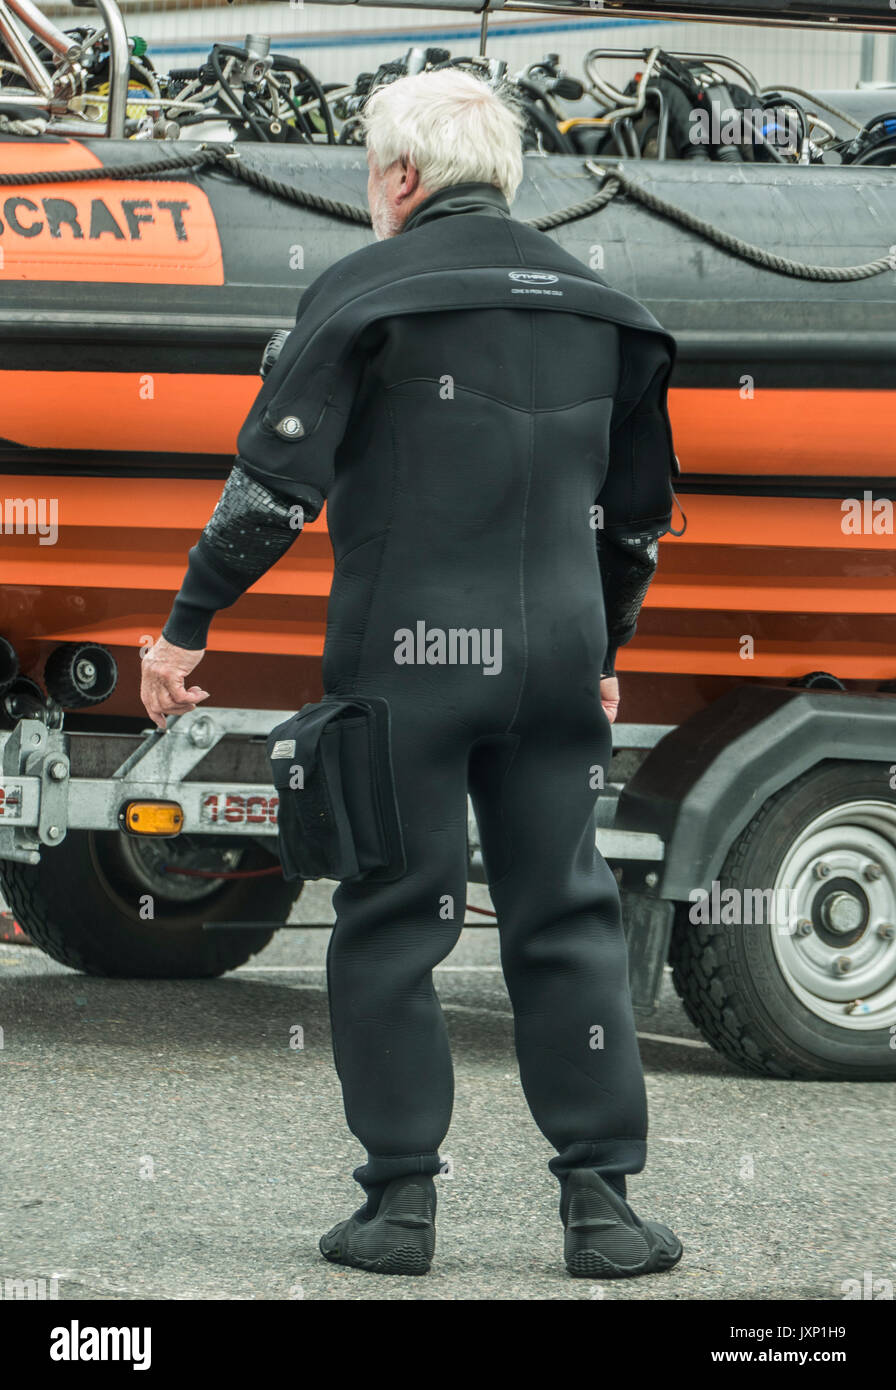 Rear view of an elderly man in a diving suit, next to a rigid inflatable boat (RIB) on a trailer, in Penzance harbour, Cornwall, England, UK. Stock Photo